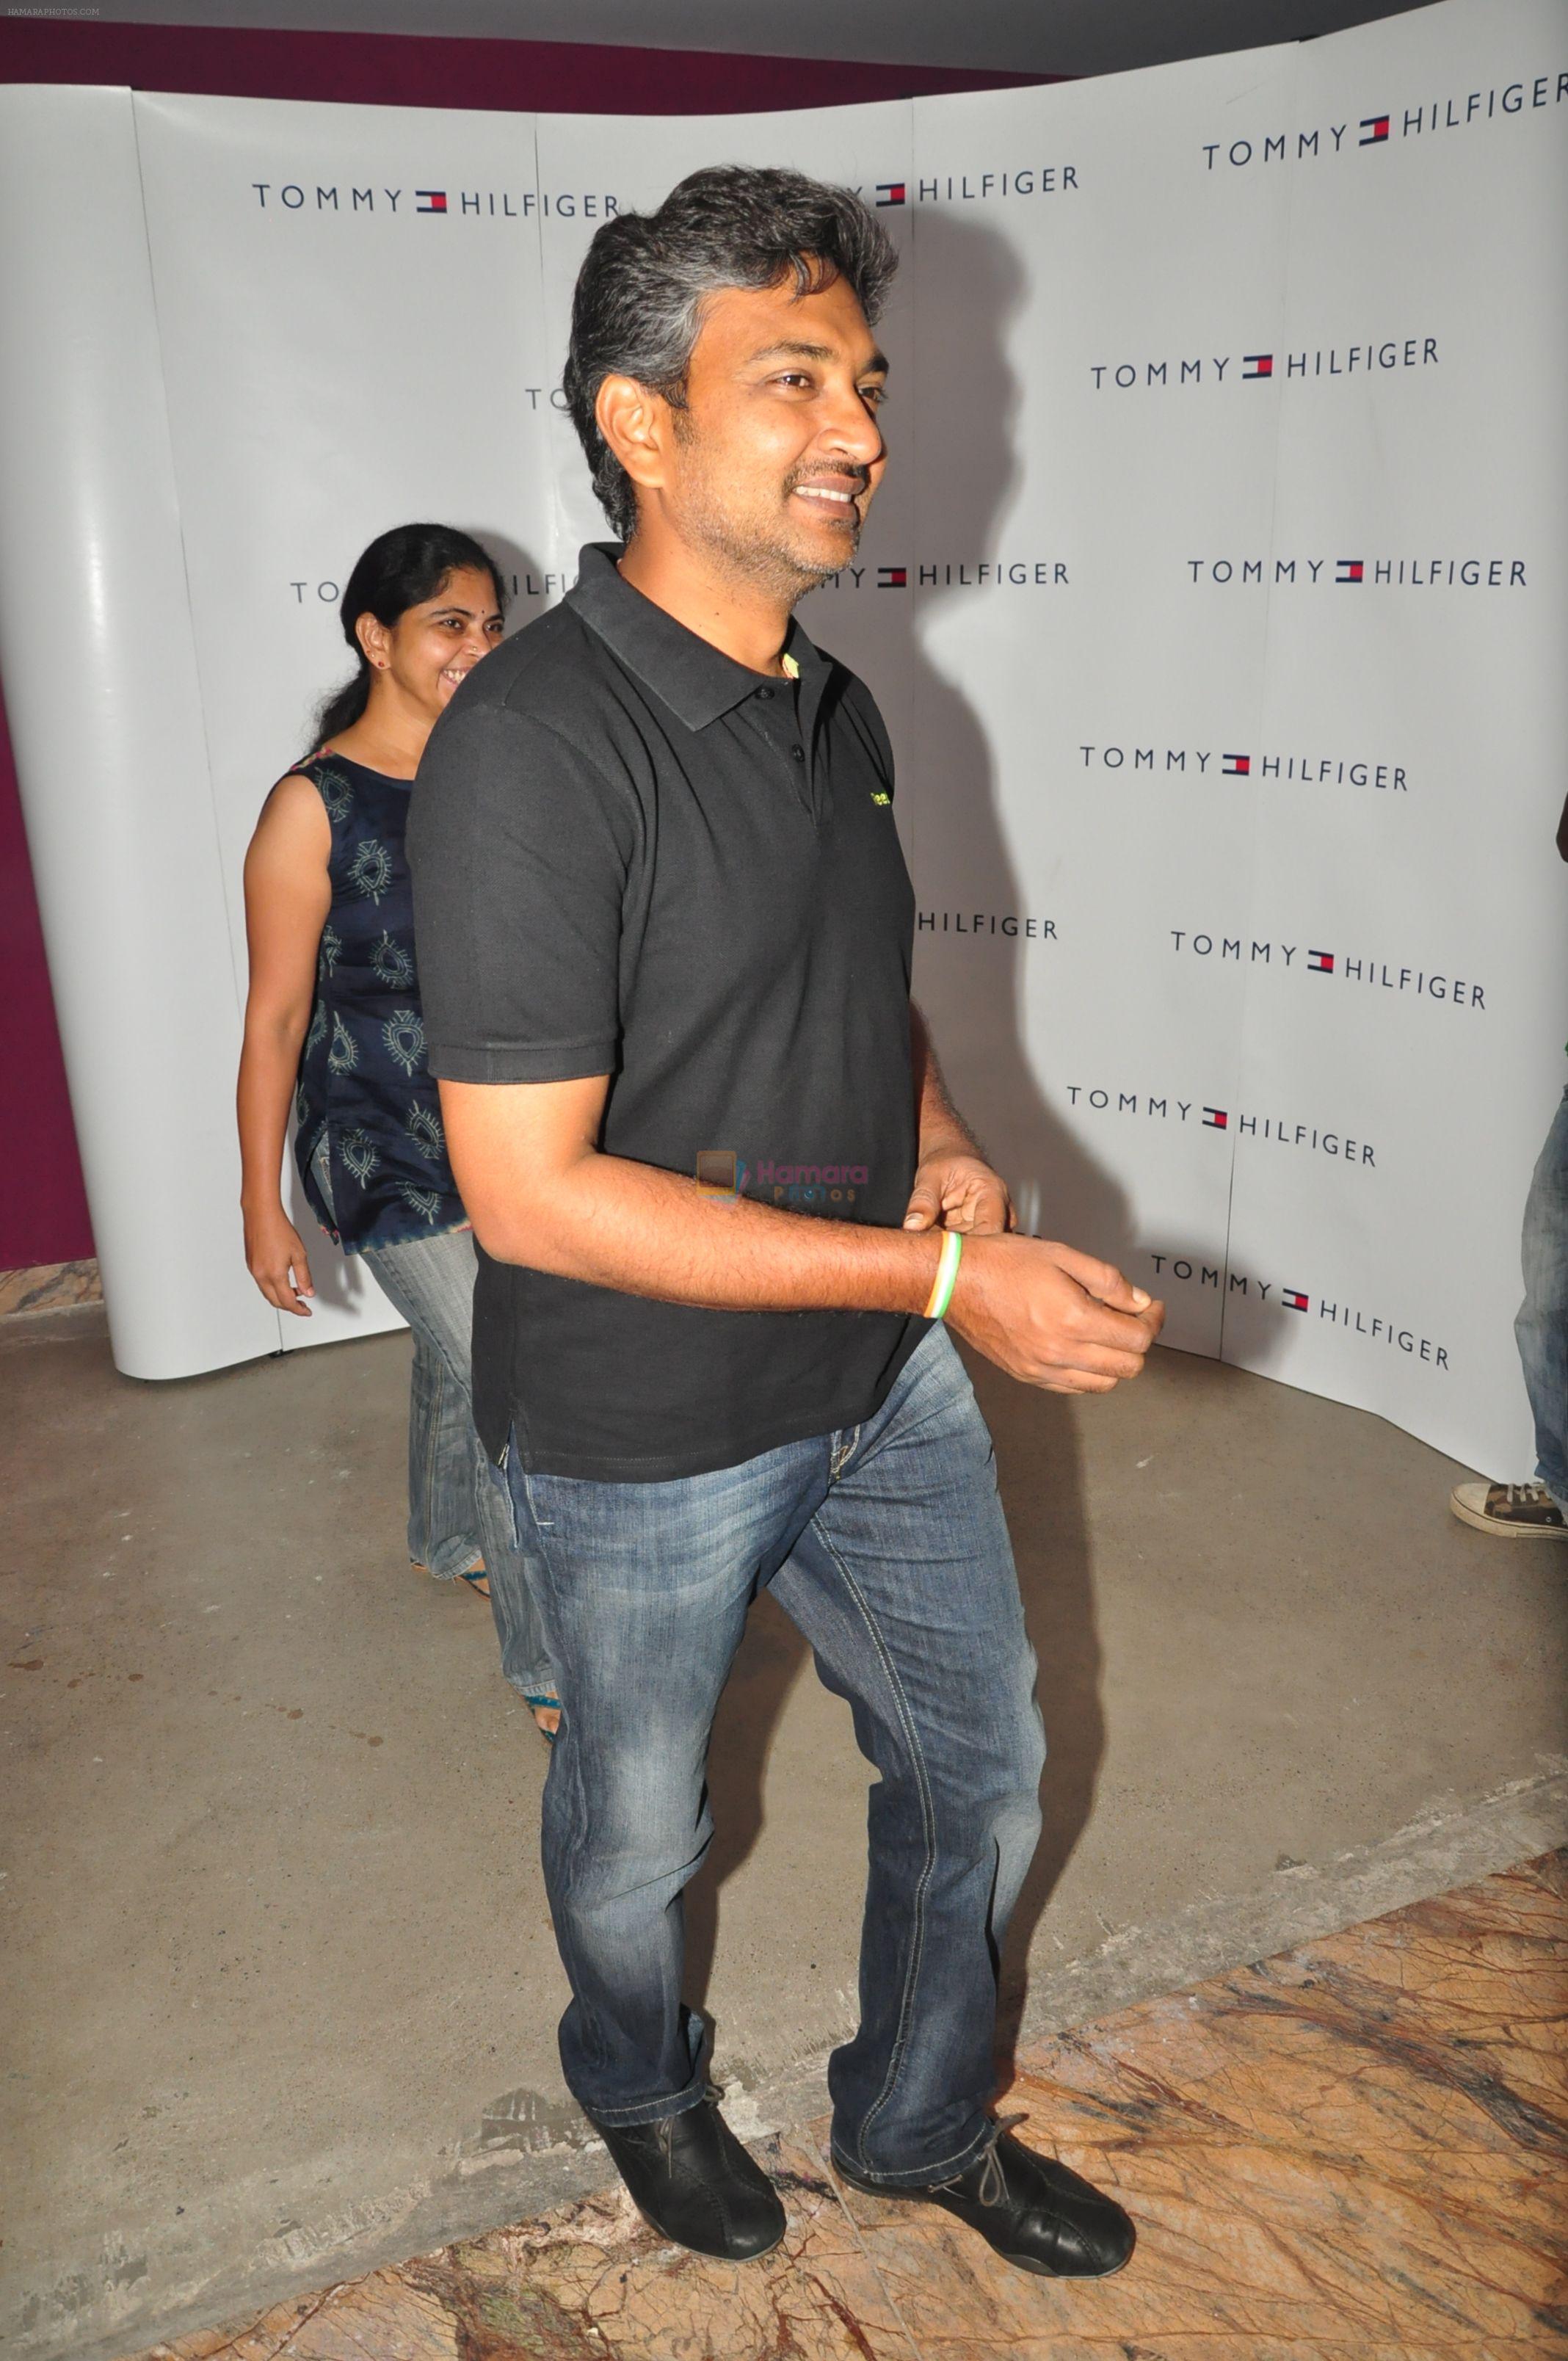 S.S Rajamouli, Rama Rajamouli attends Tommy Hilfiger Showroom Relaunch Party held at Kismet Pub, Park Hotel, Hyderabad on 17th September 2011